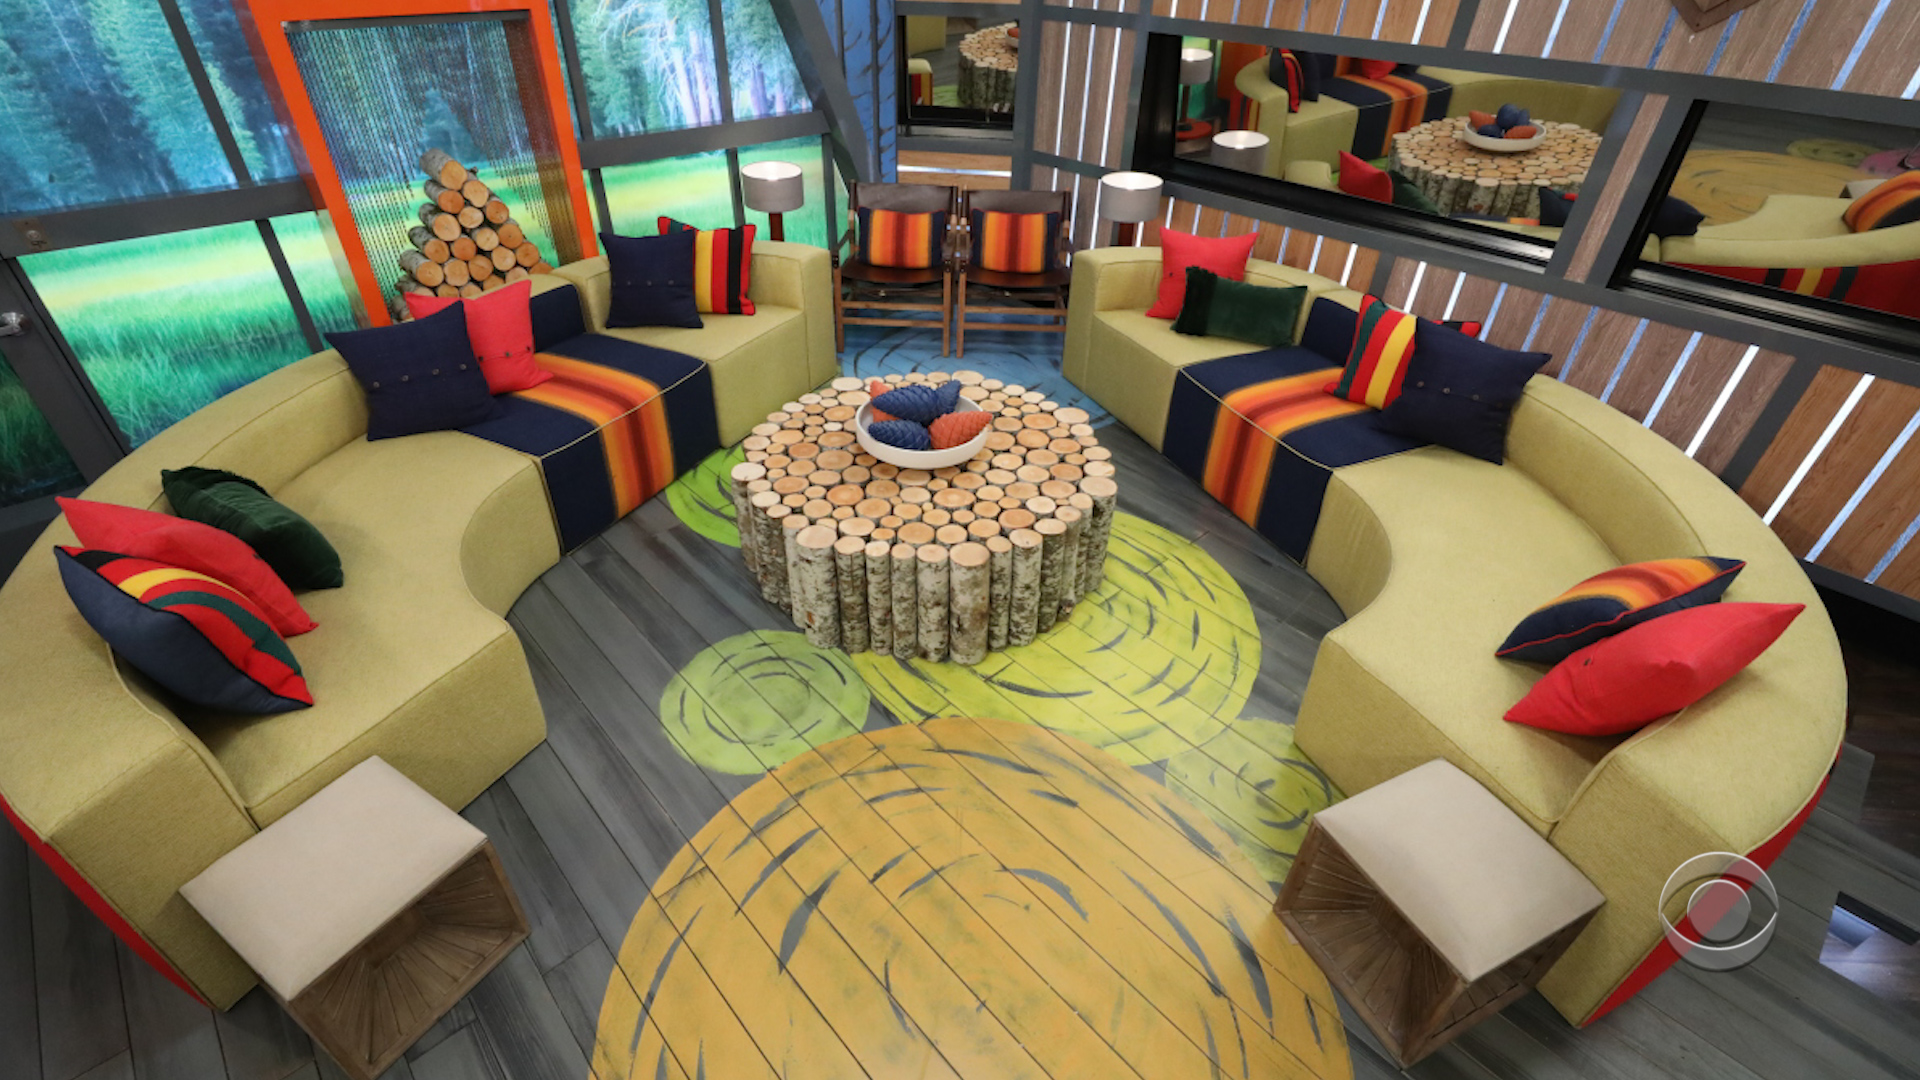 Big Brother - Main living area and couches